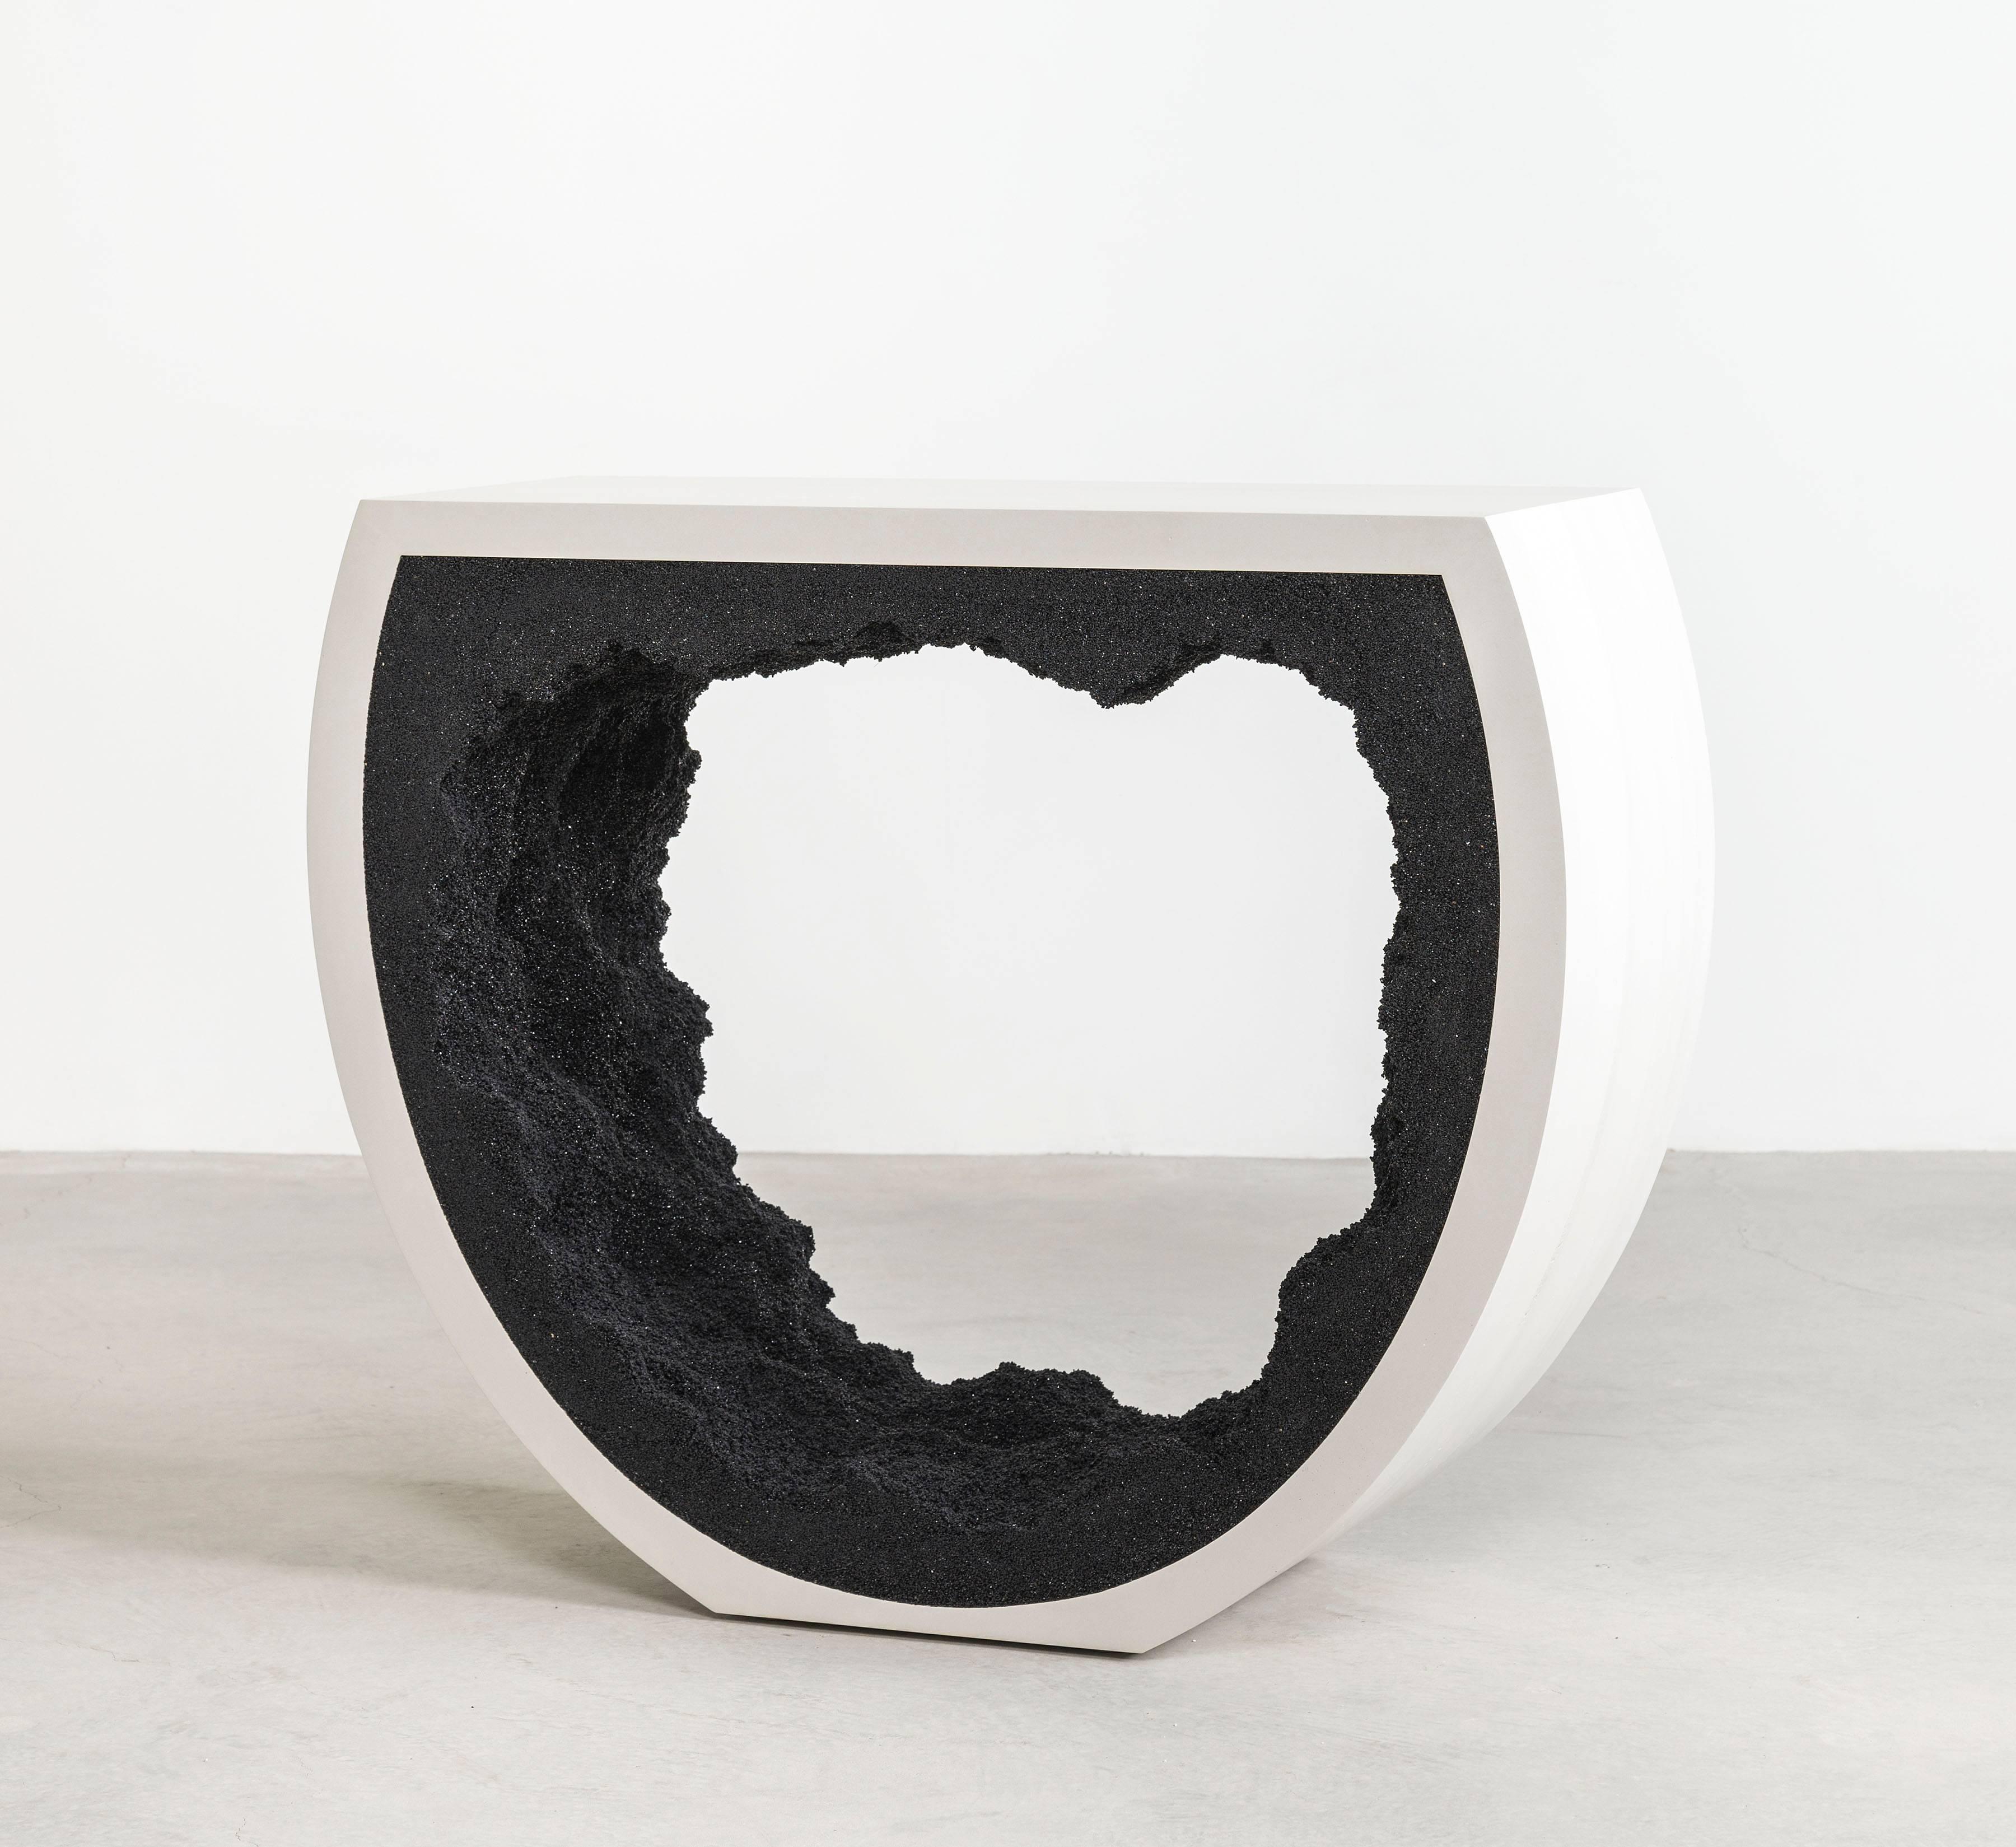 Composed from a combination of materials, the semicircle console consists of a hand-dyed cement exterior and a silica interior. Packed by hand within the smooth white cement, the black silica forms an organic texture to contrast the strong structure.